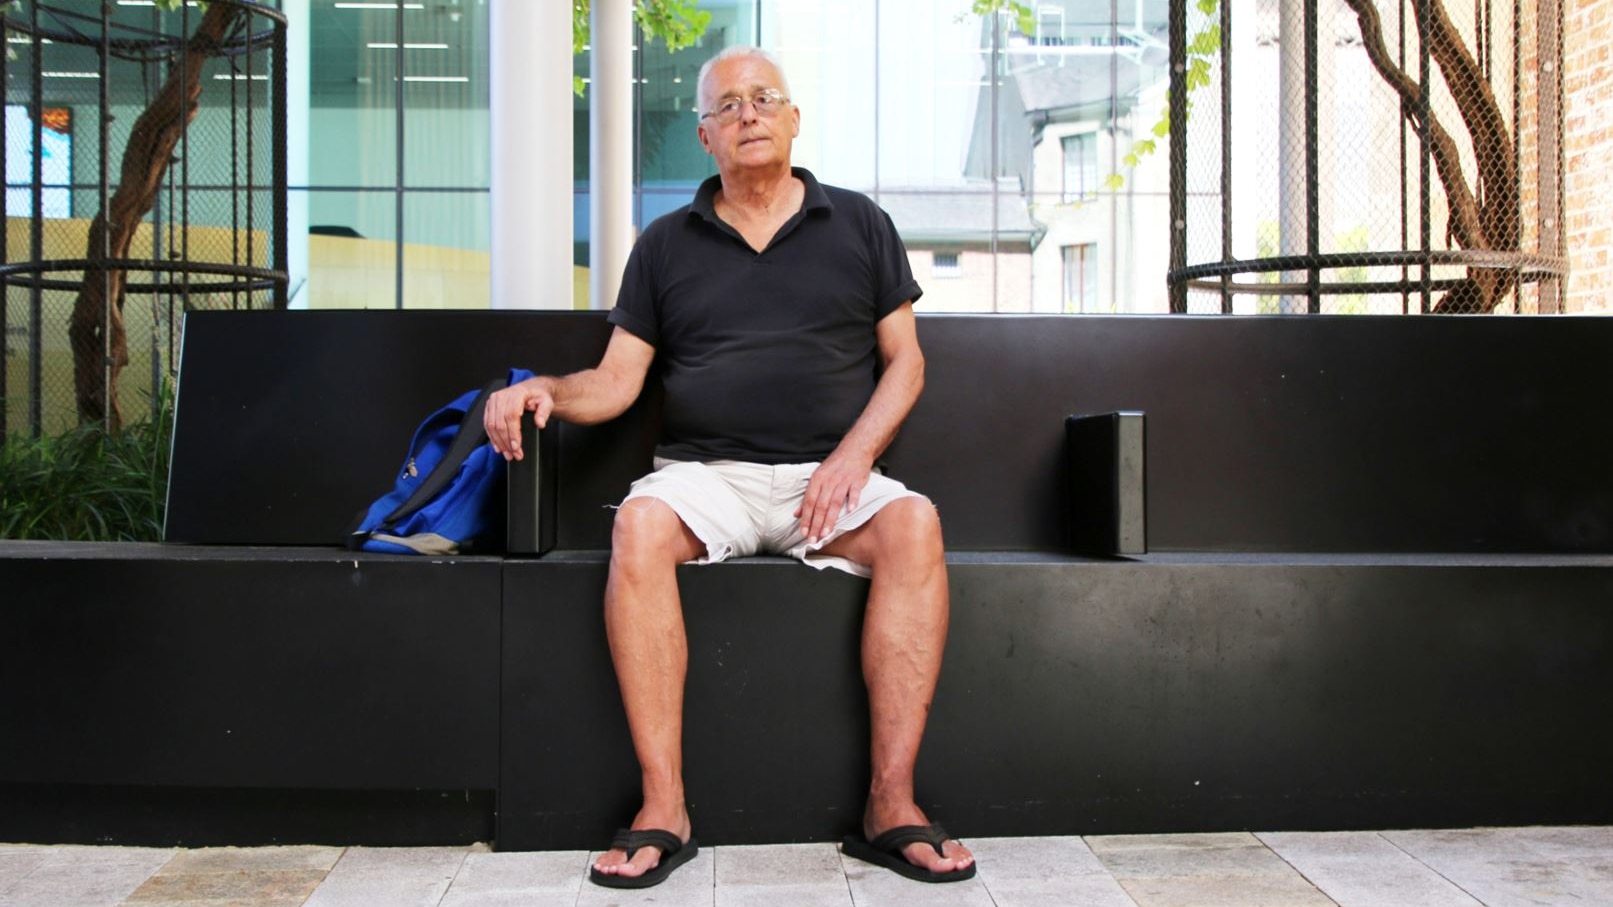 perth councils deploying 'hostile architecture' to make life even tougher for homeless people